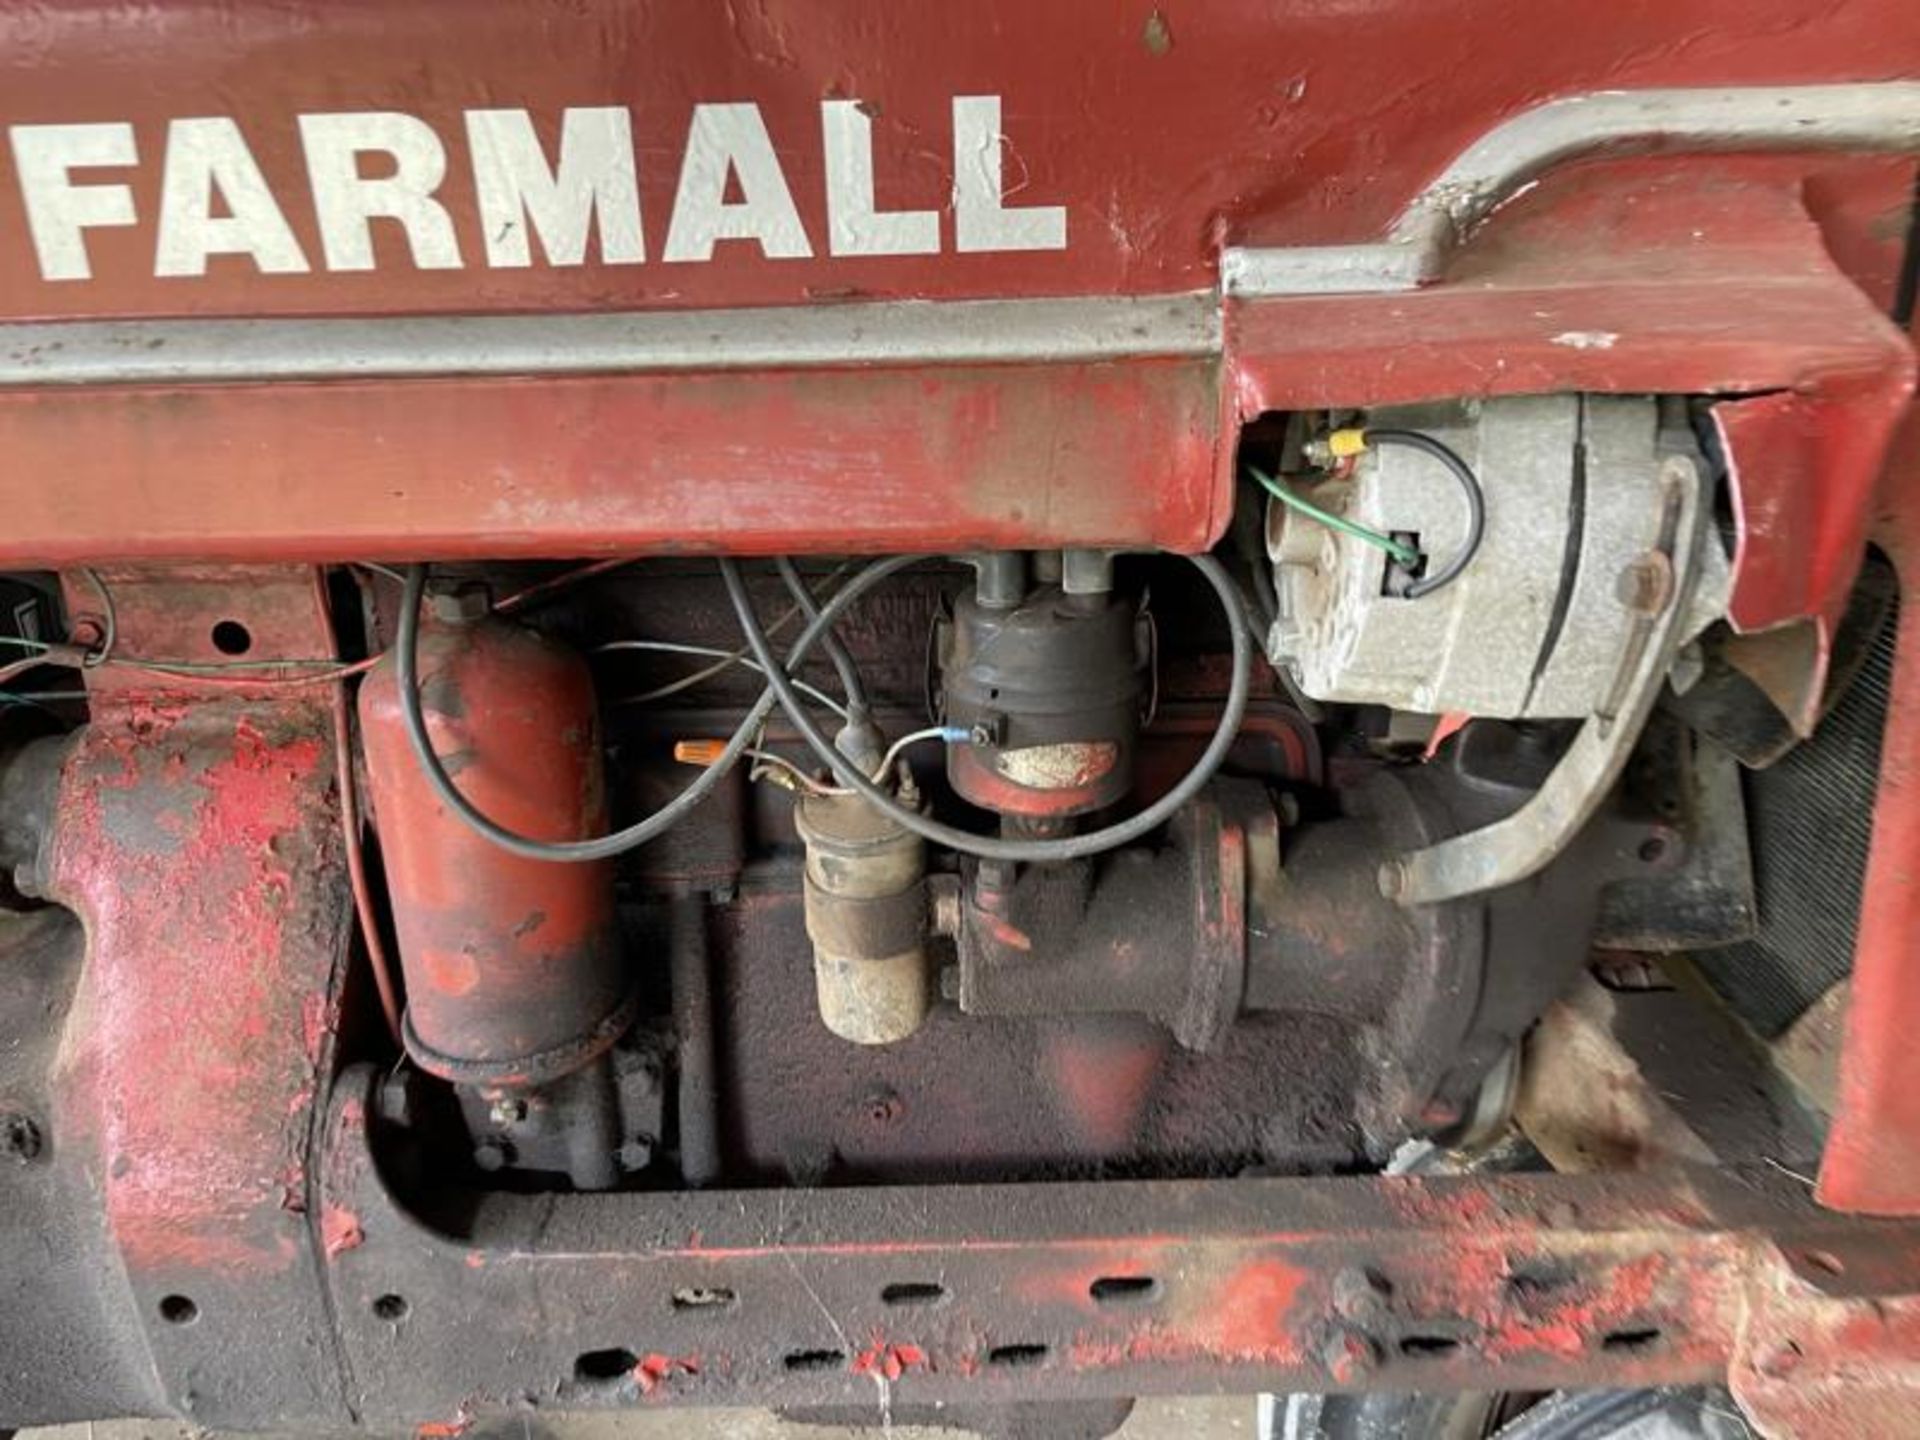 Farmall Tractor Believed To Be 1954, Row-CropFarmall Tractor Believed To Be 1954, Row-Crop - Image 21 of 35